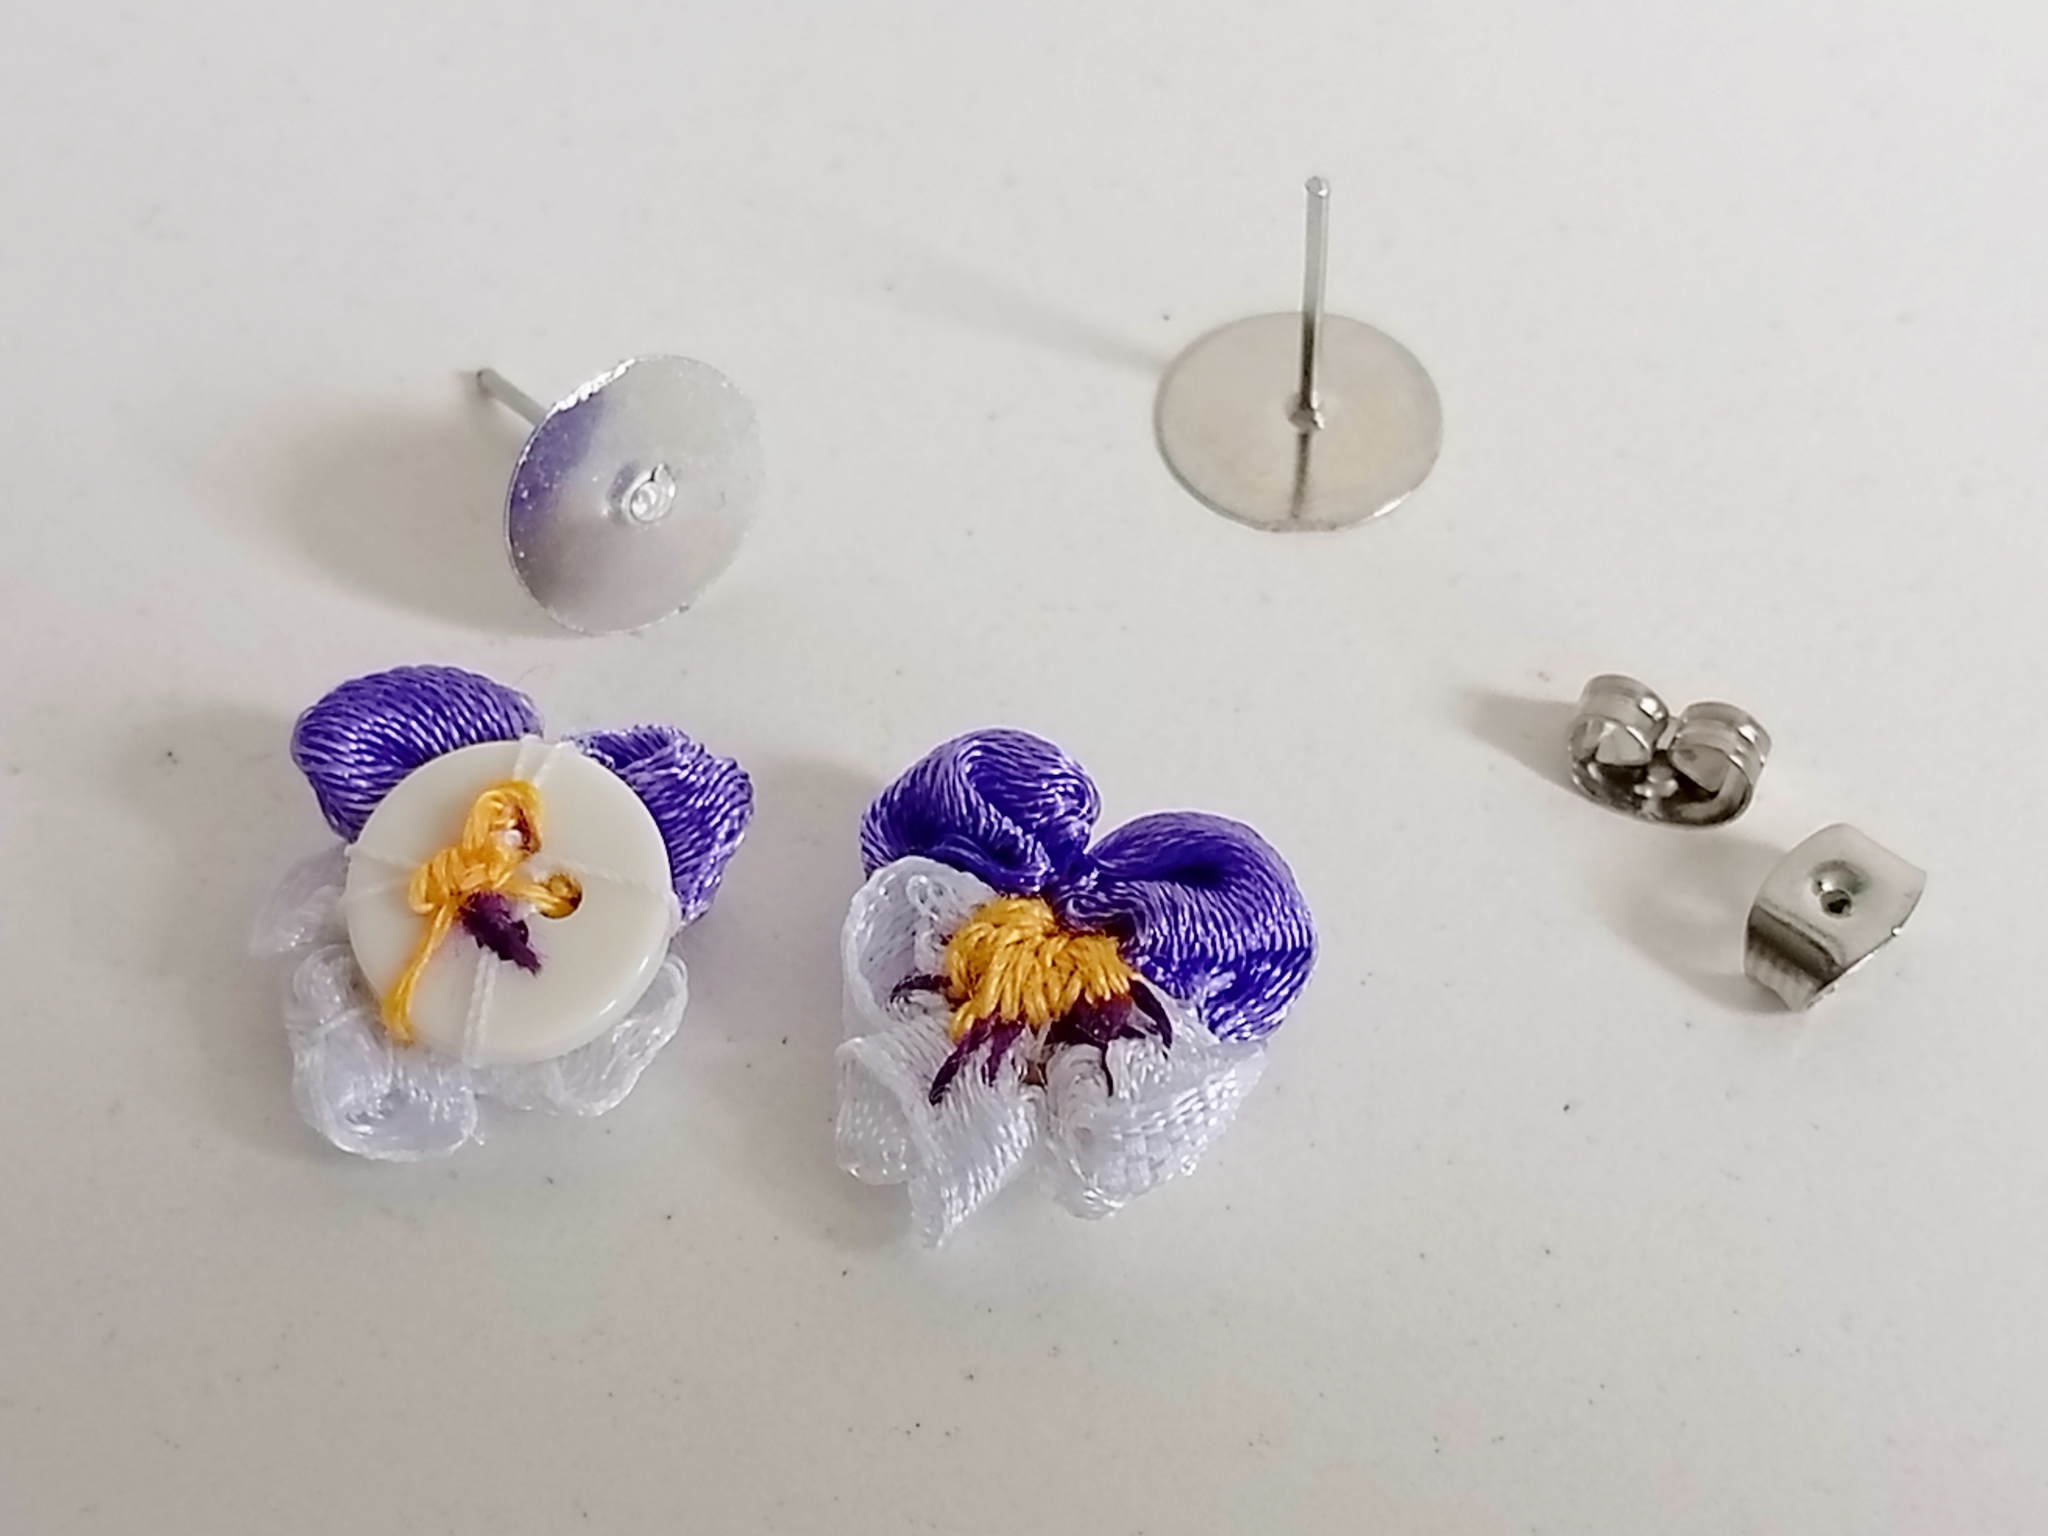 Violet earrings - My, Earrings, Violets, Flowers, Embroidery, Embroidery with ribbons, With your own hands, Decoration, Needlework, Materials for needlework, Needlework with process, Friday tag is mine, Longpost